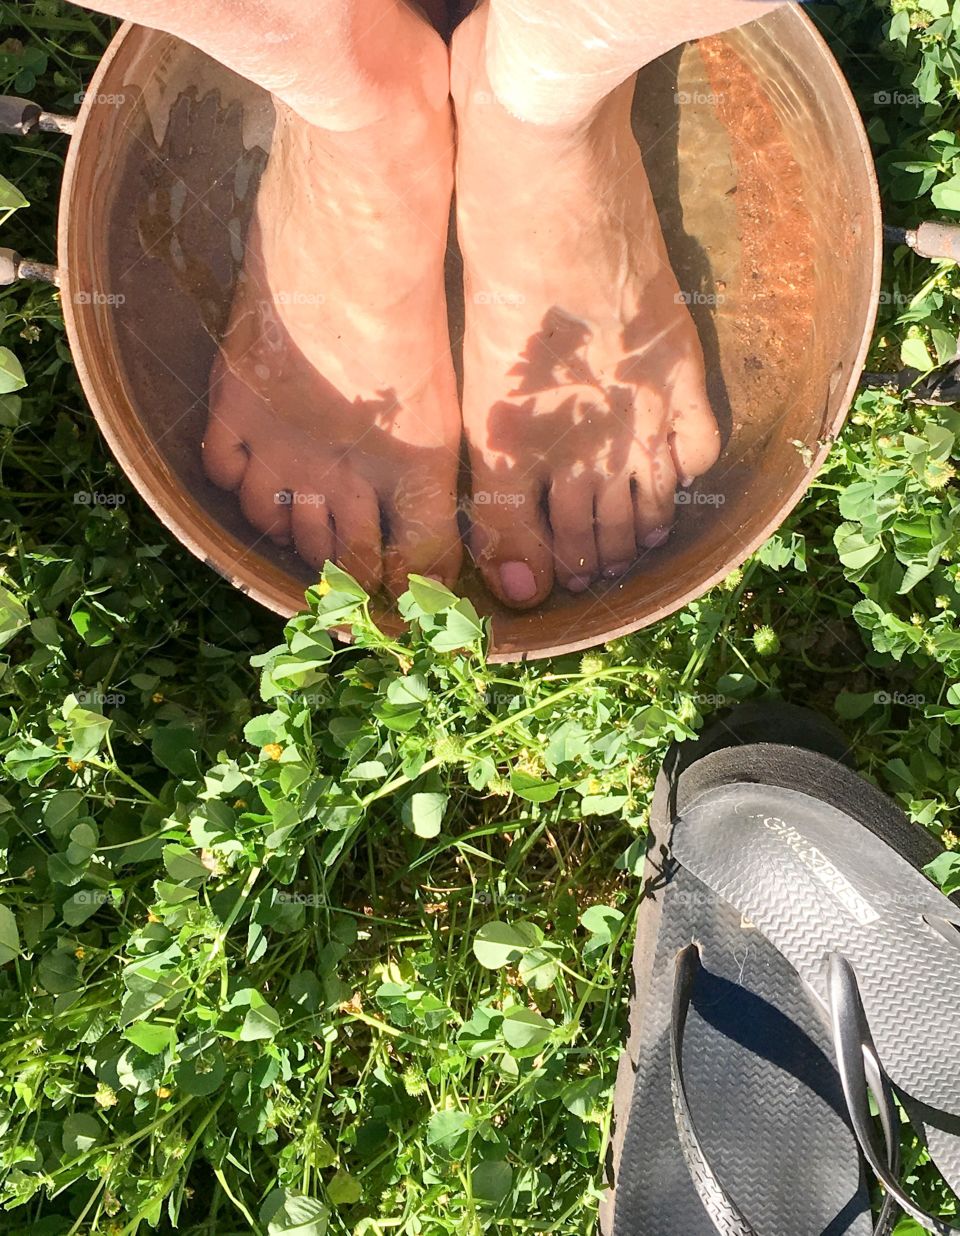 Cooling off on hot day in back yard feet in antique tin pot full of cool water set on grass and clover